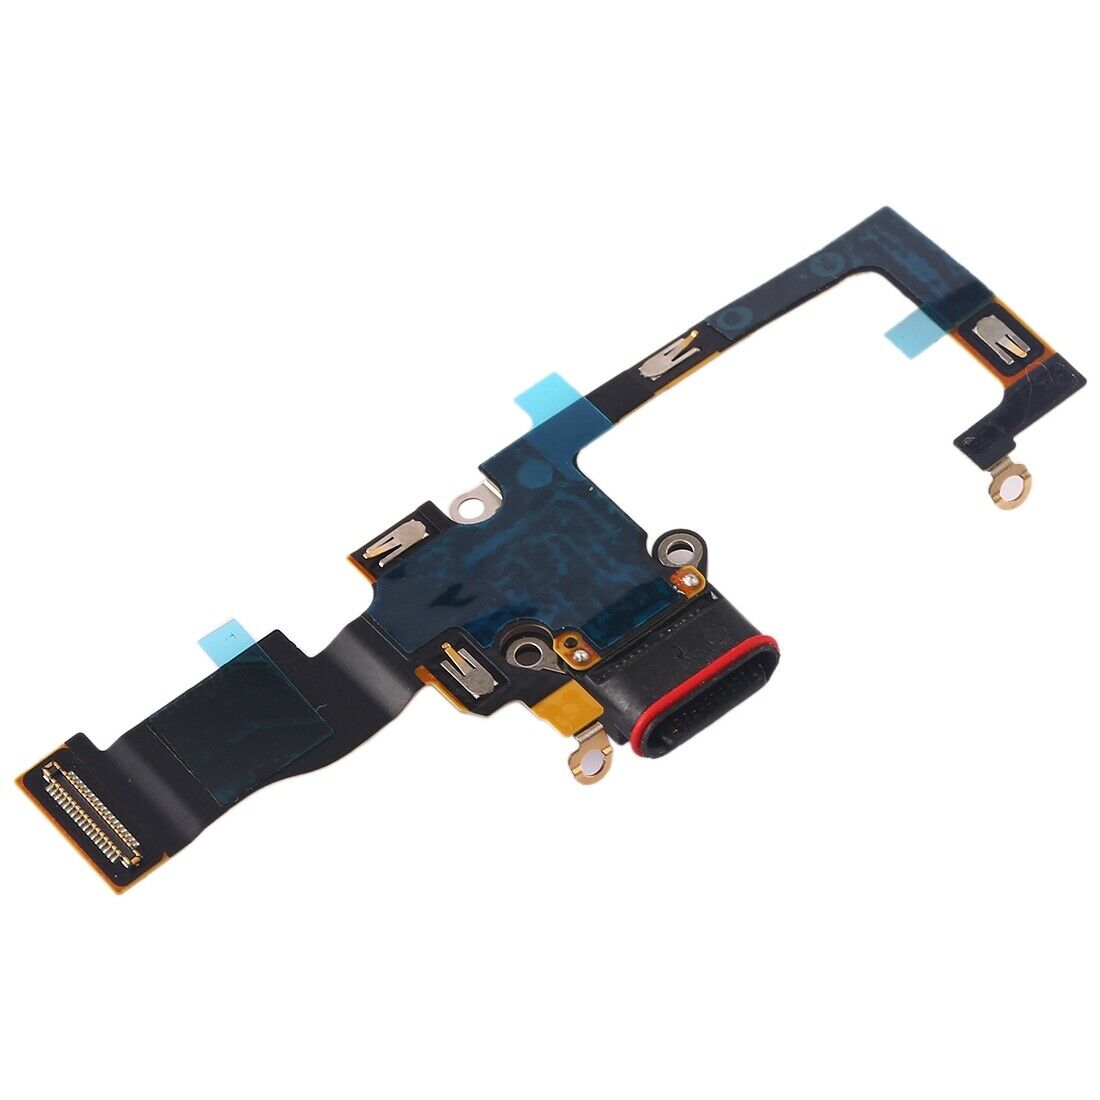 Google Pixel 3 Charging Port Flex Cable for [product_price] - First Help Tech